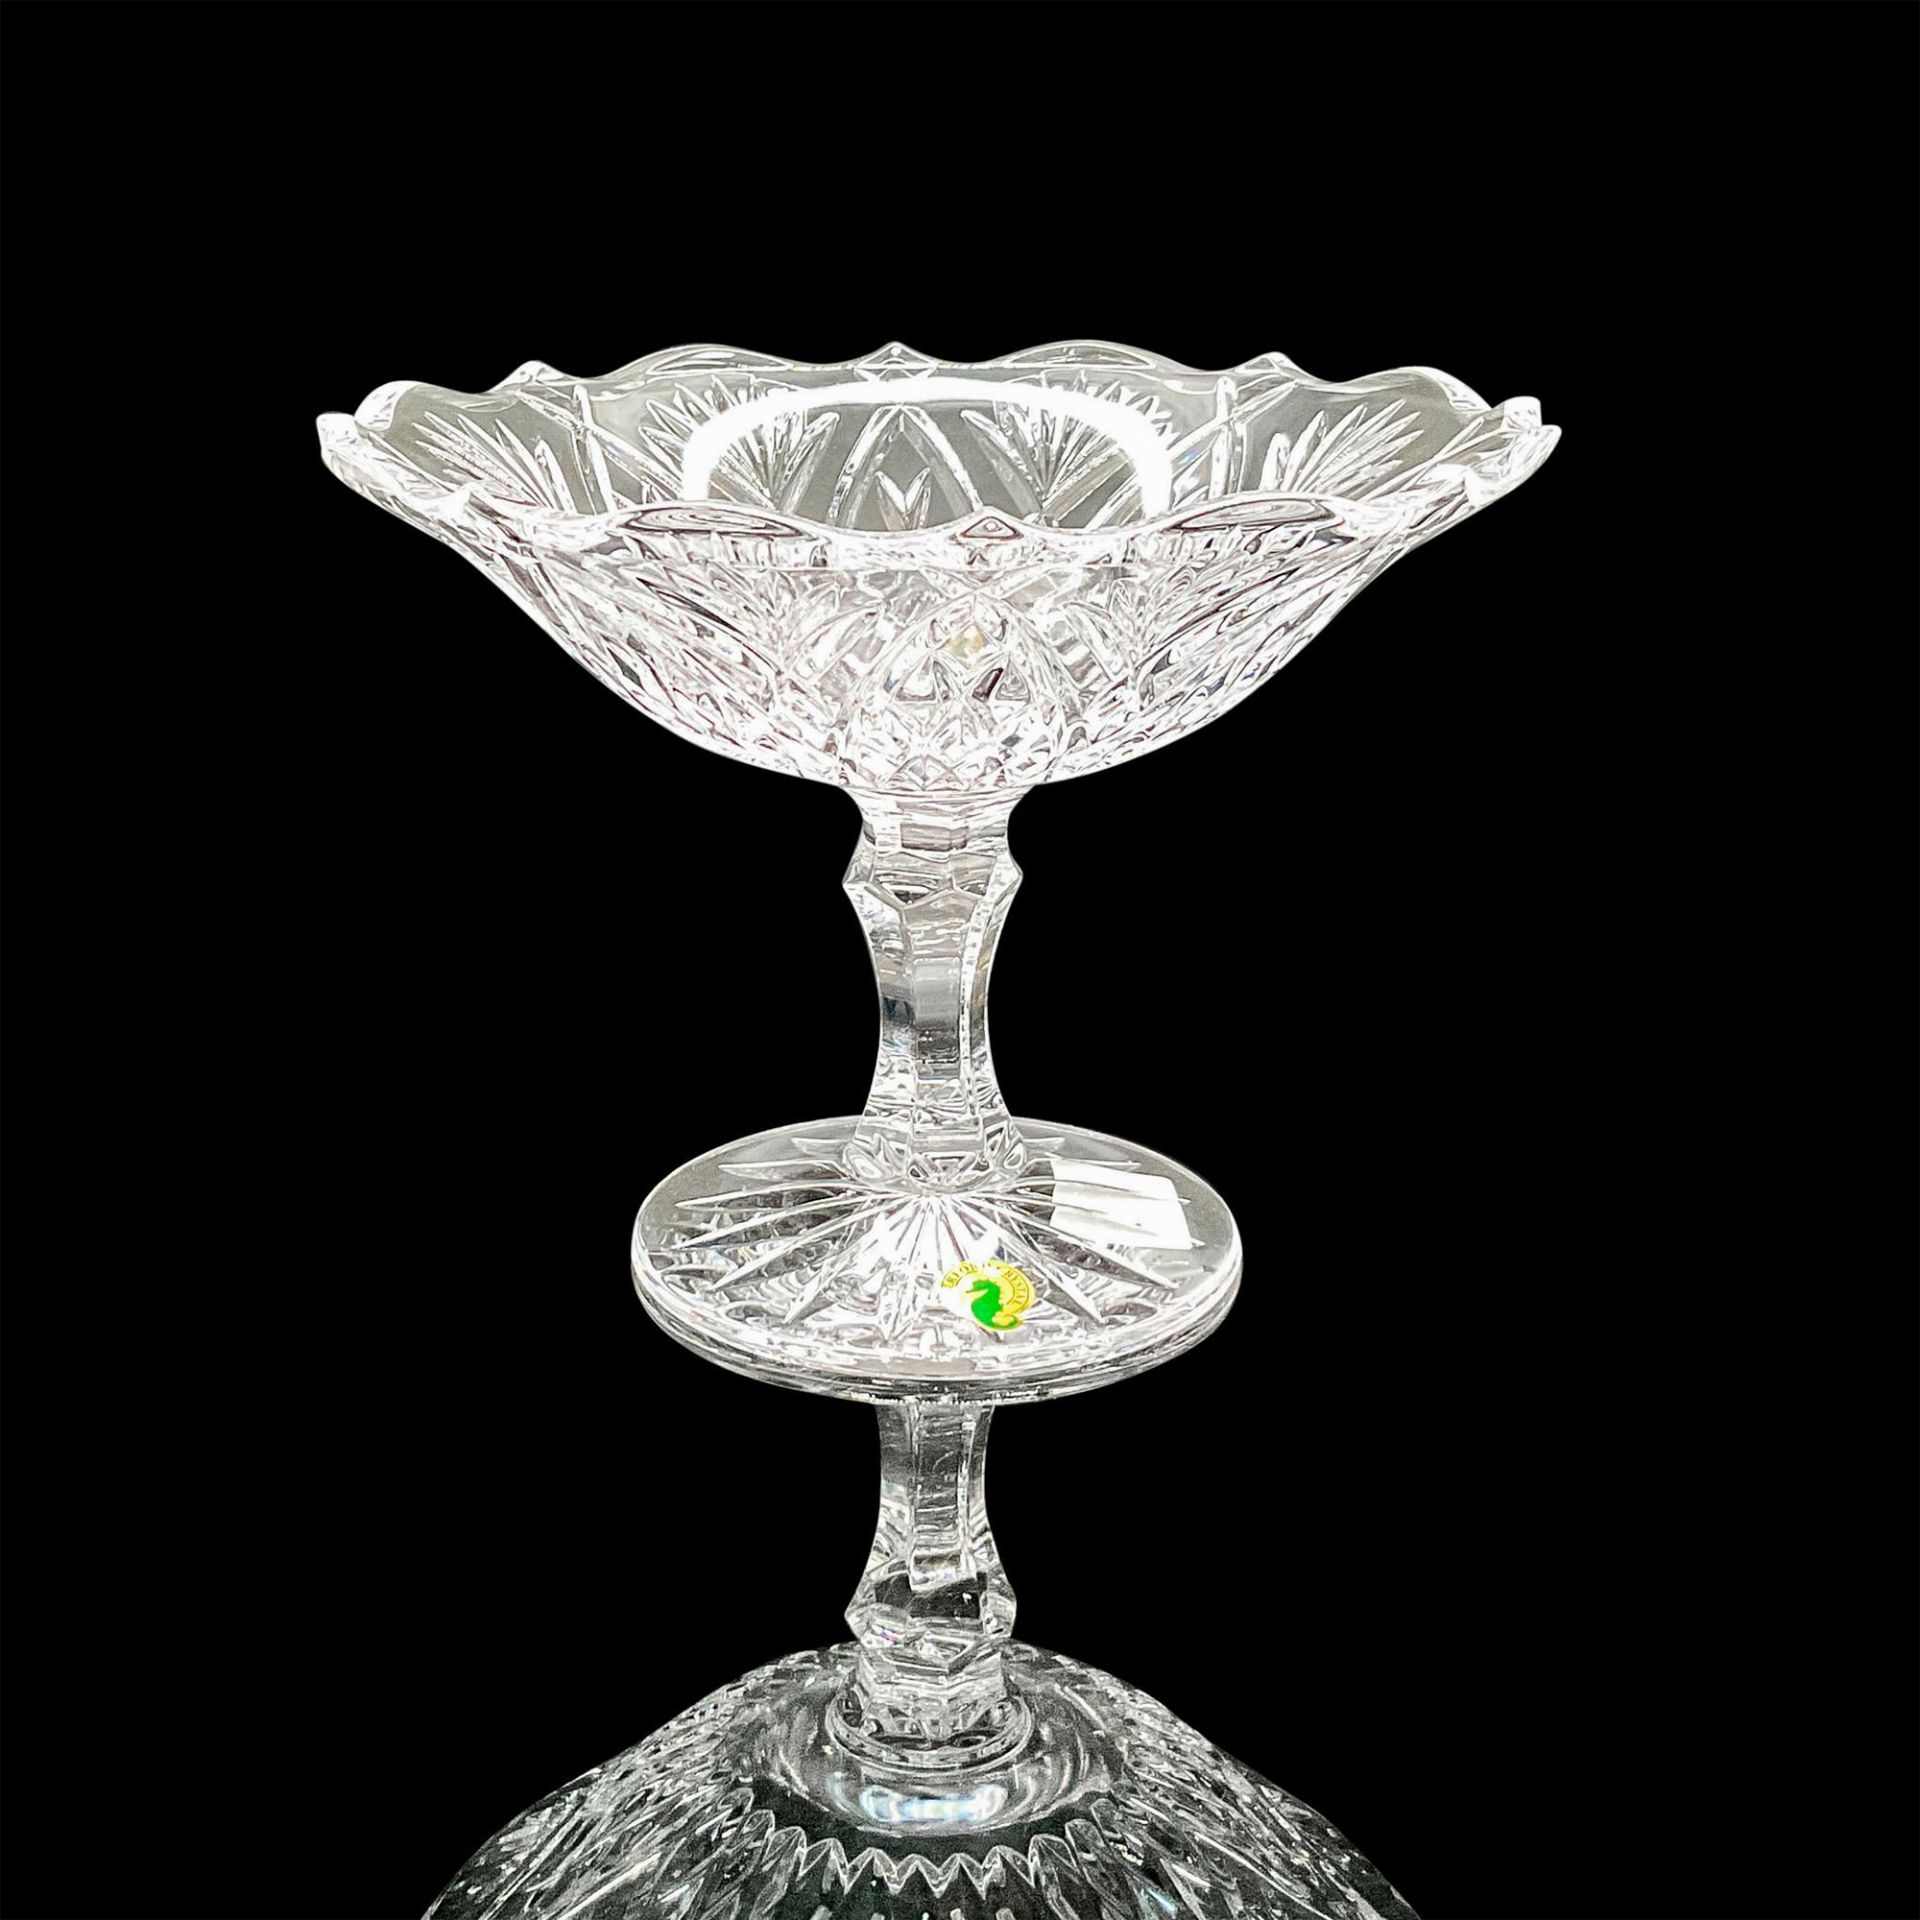 Waterford Crystal Footed Compote Bowl, Dunmore